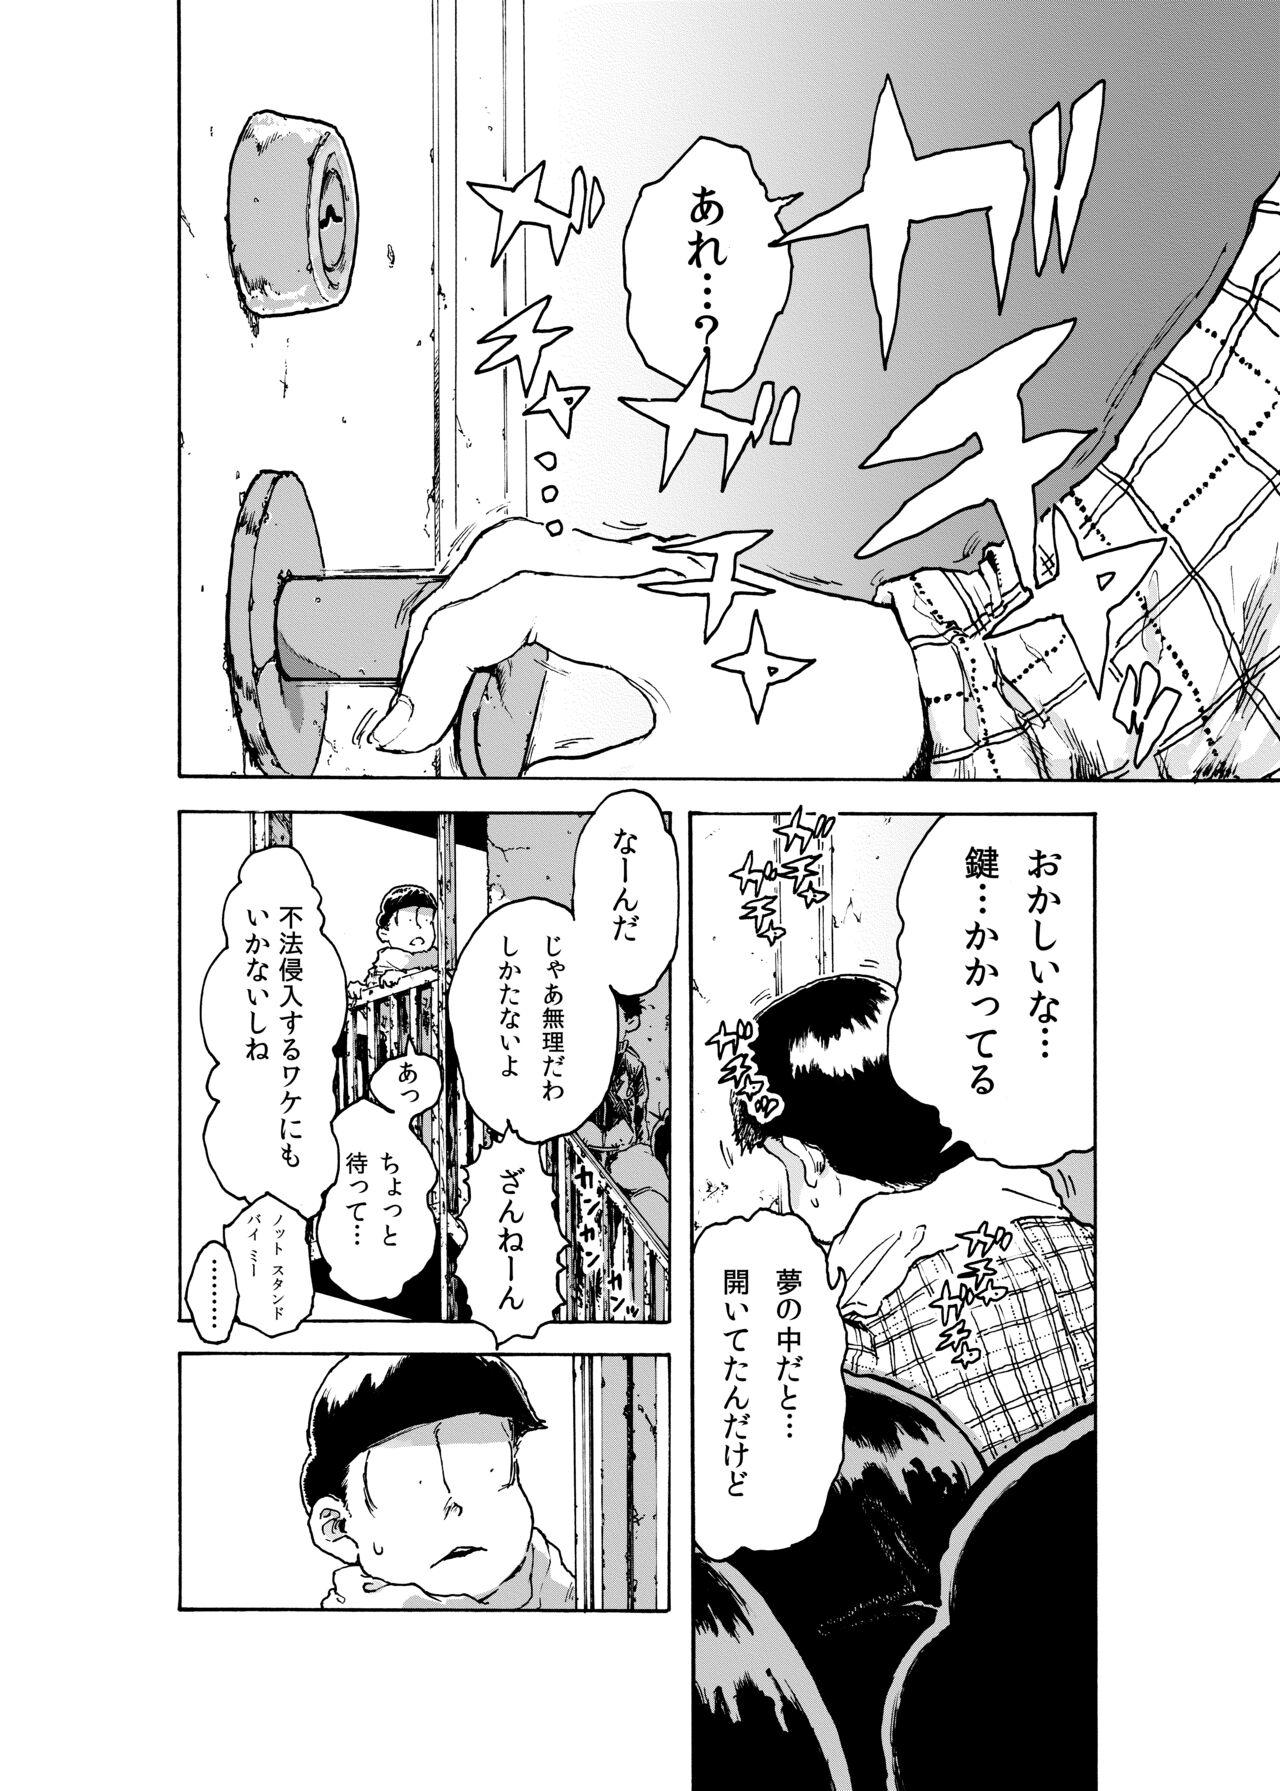 Relax WEB Sairoku 'BUT WHO IS THE DREAMRE?' - Osomatsu-san Wet Pussy - Page 2